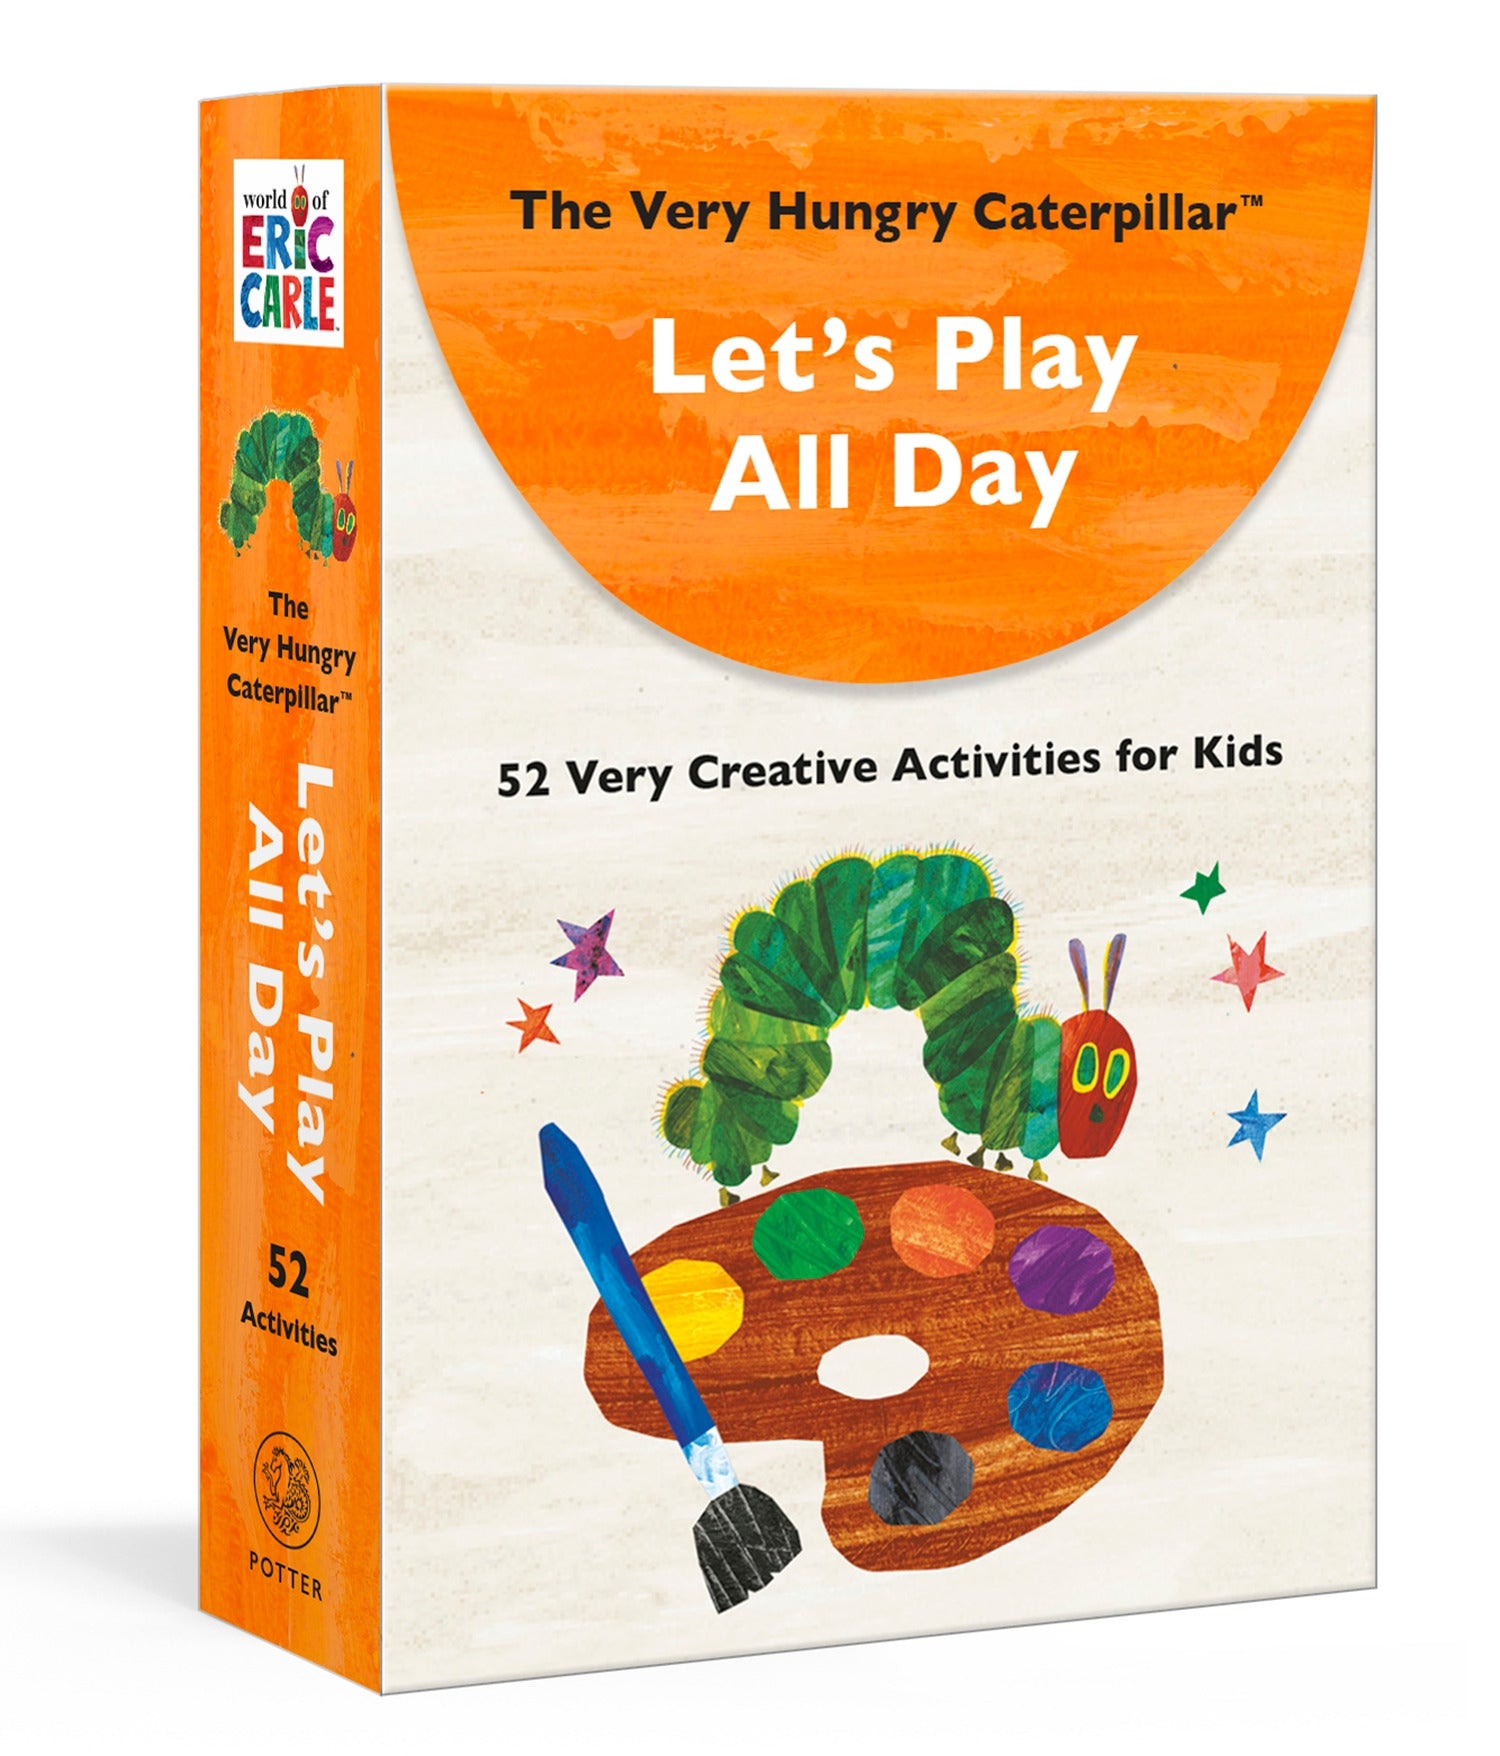 Very Hungry Caterpillar: Let's Play All Day